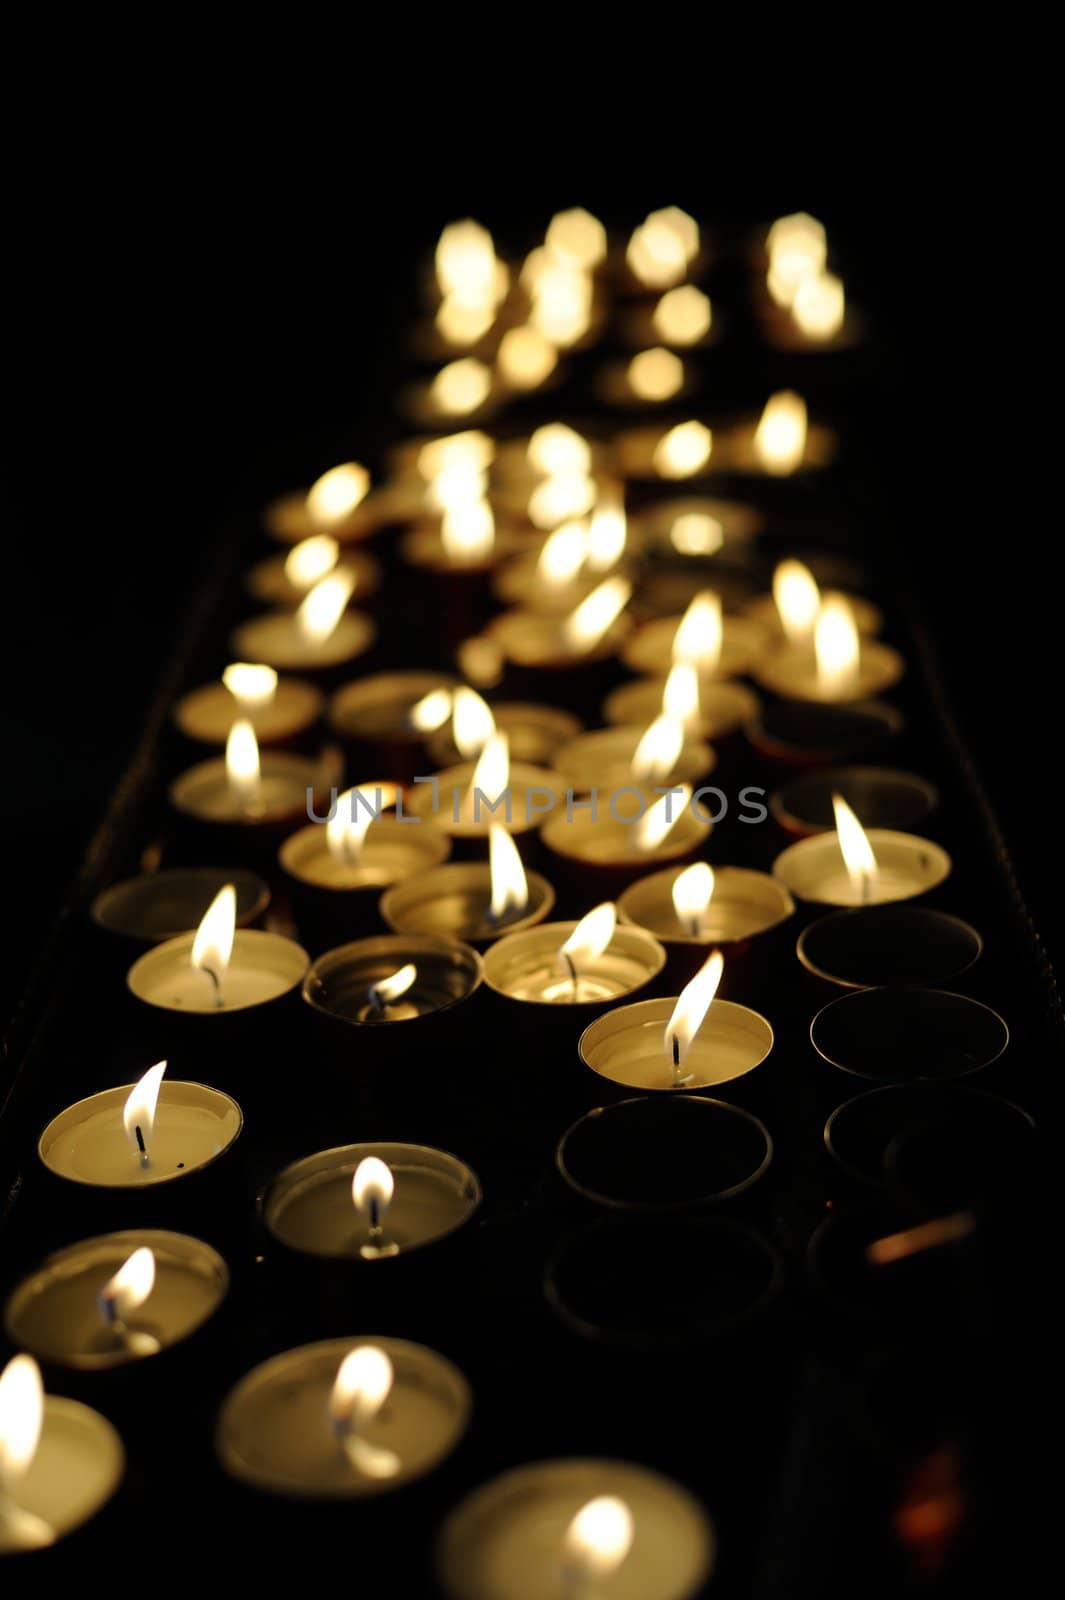 Candles by mizio1970